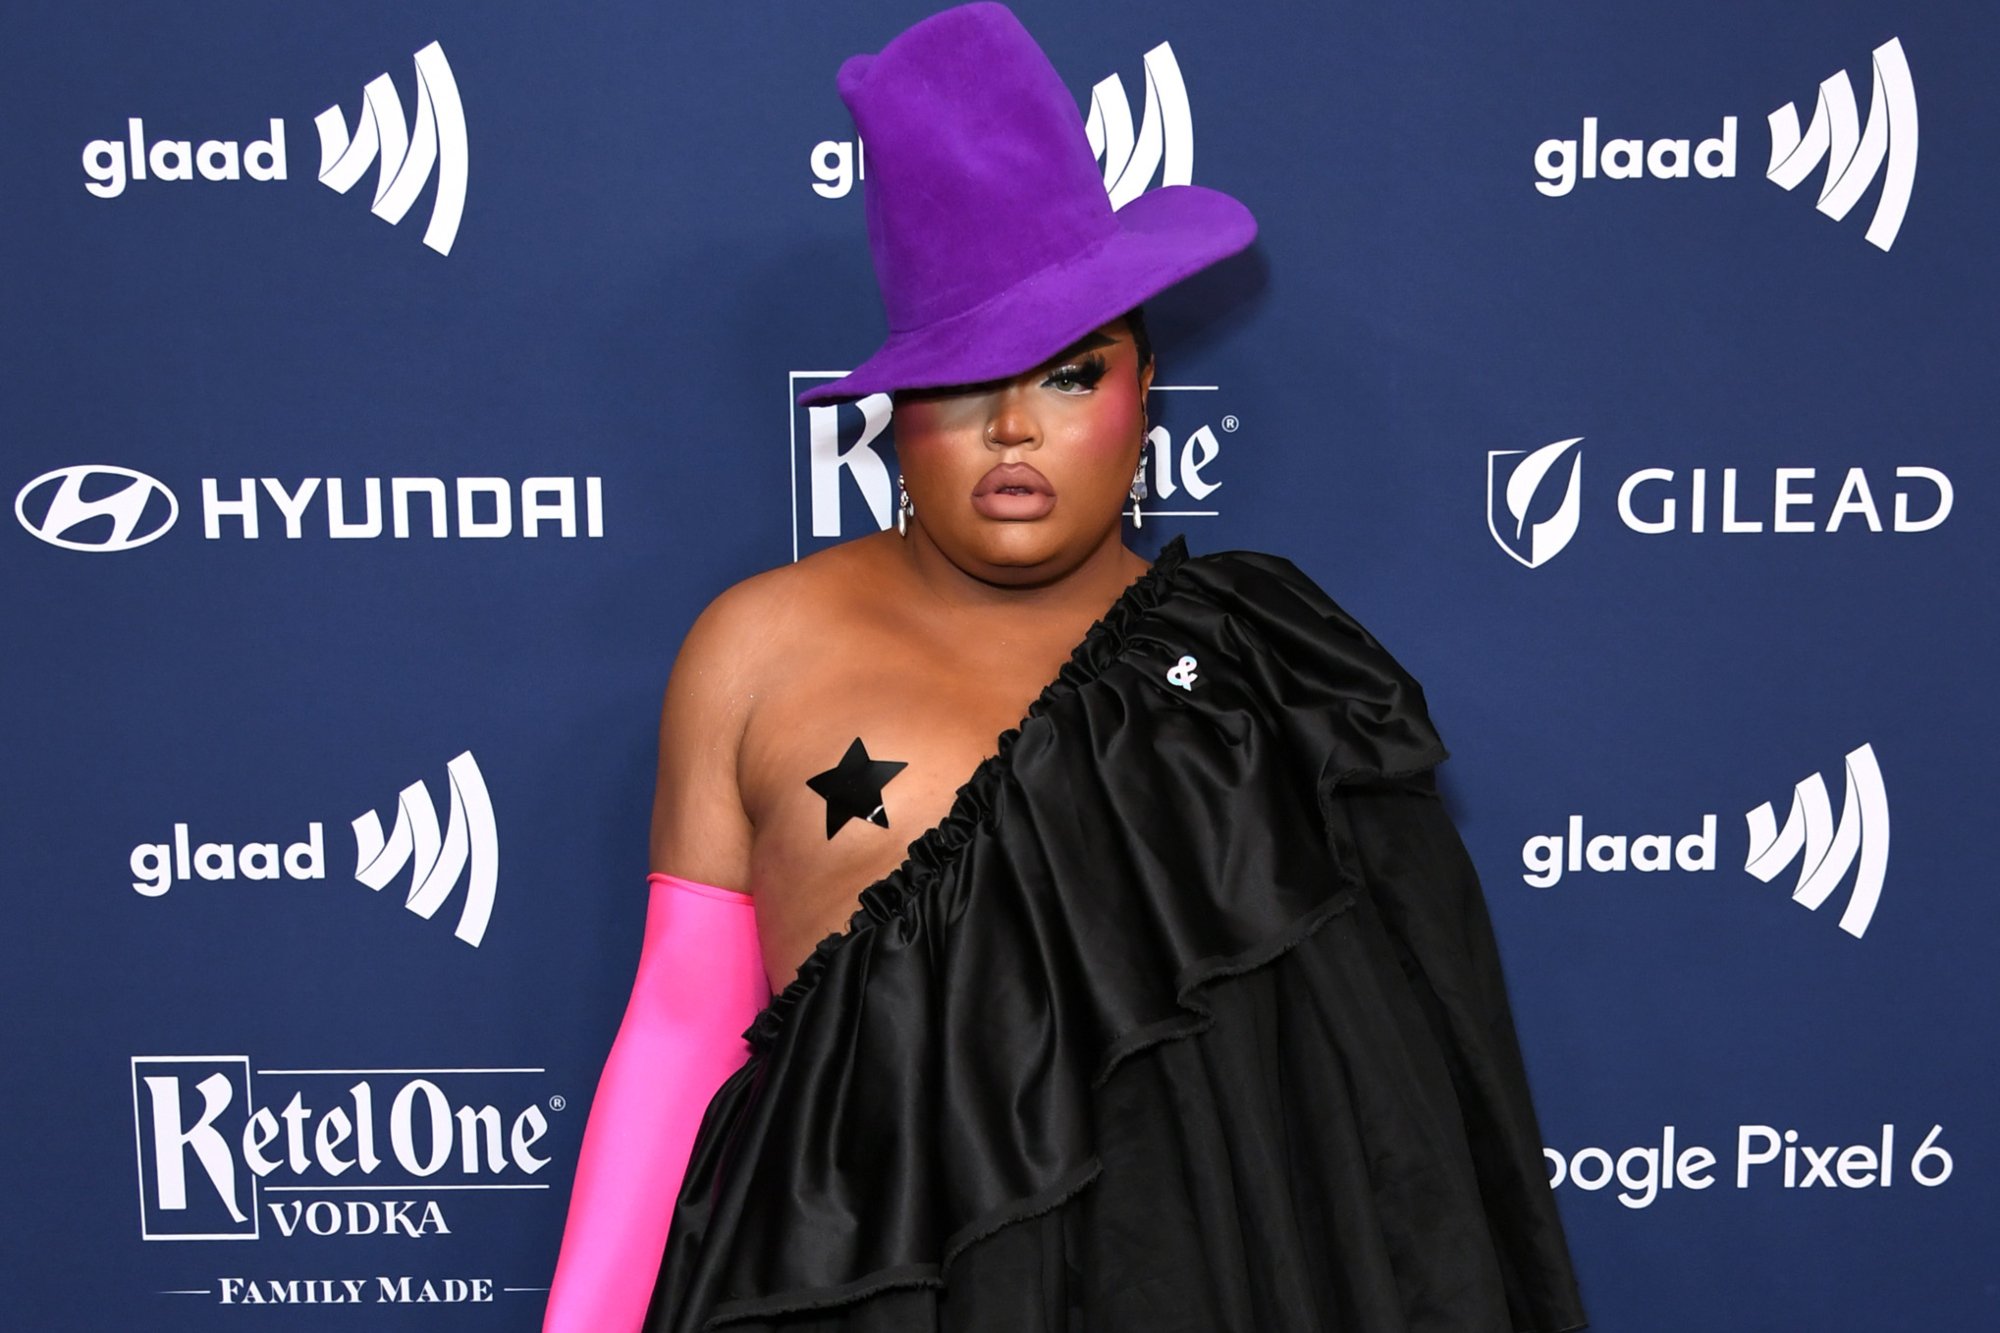 'RuPaul's Drag Race' Season 13 Kandy Muse wearing a purple hat, pink globes, and a black costume standing in front of a blue step and repeat